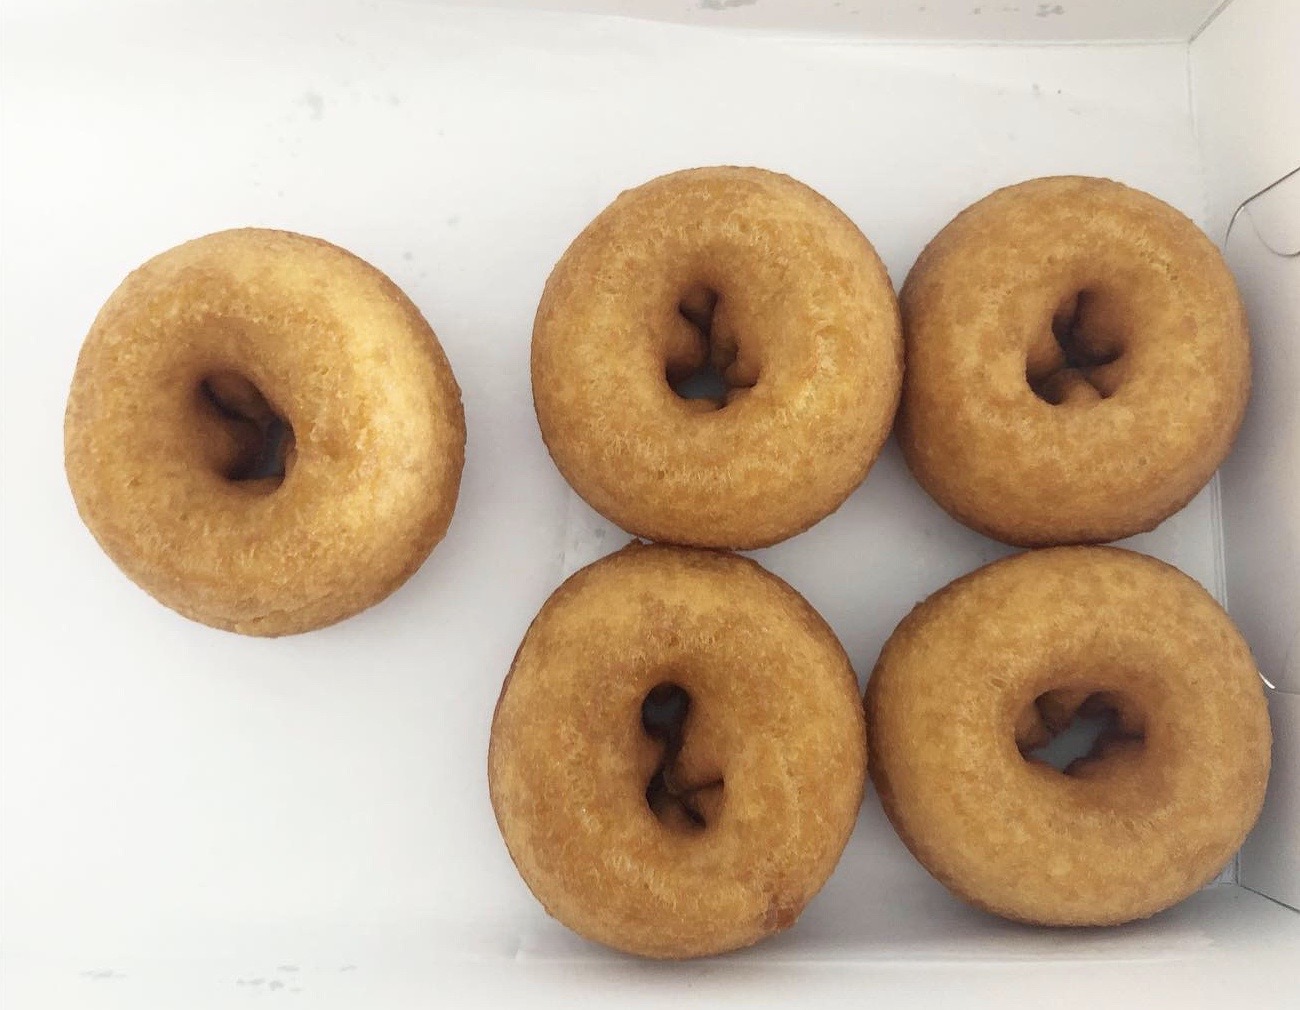 Five naked donuts sit in a donut box from Industrial Donuts in Savoy. Photo by Alyssa Buckley.